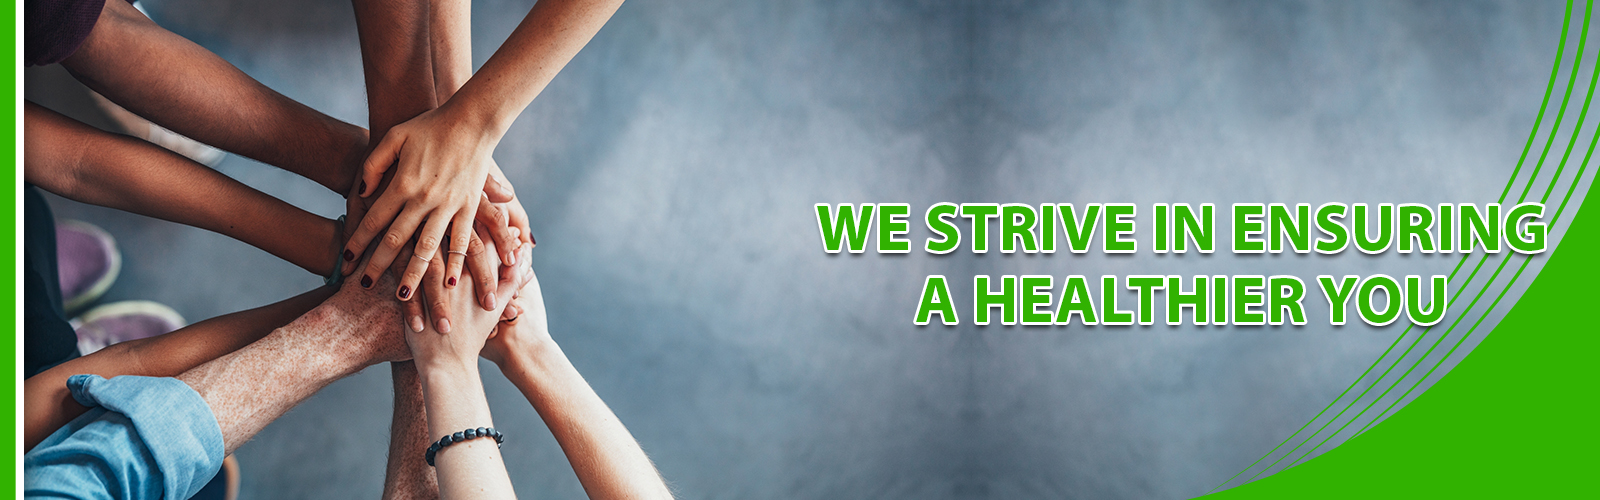 we strive in ensuring a healthier you